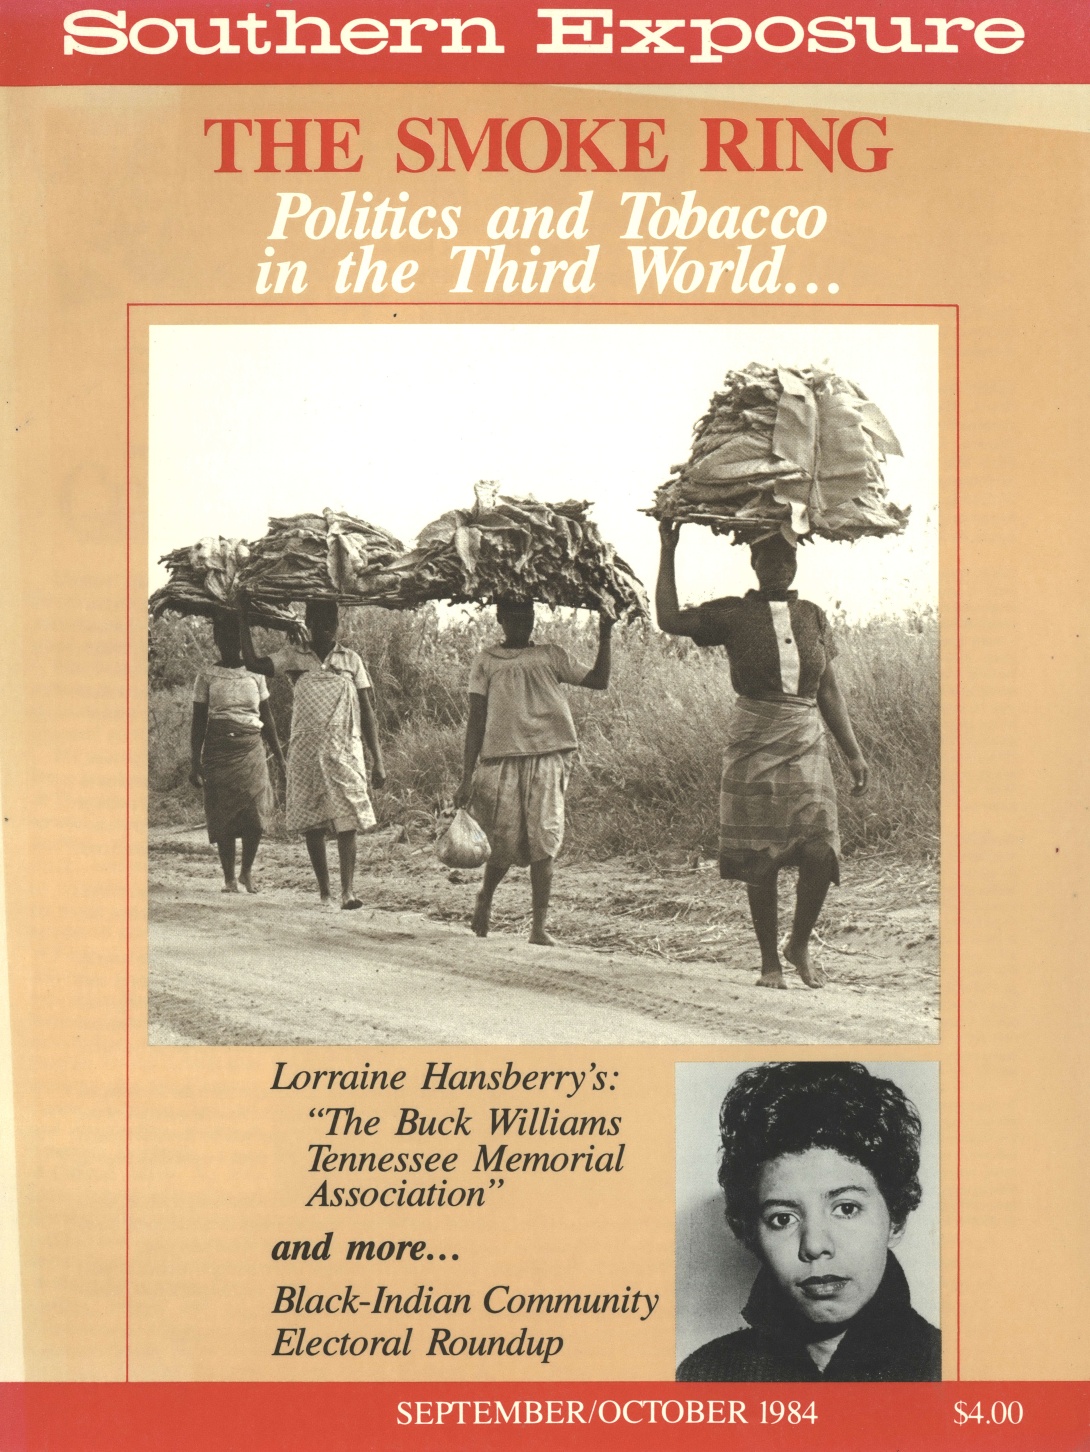 Magazine cover with photo of women walking down dirt road carrying tobacco leaves on their heads; photo of Lorraine Hansberry